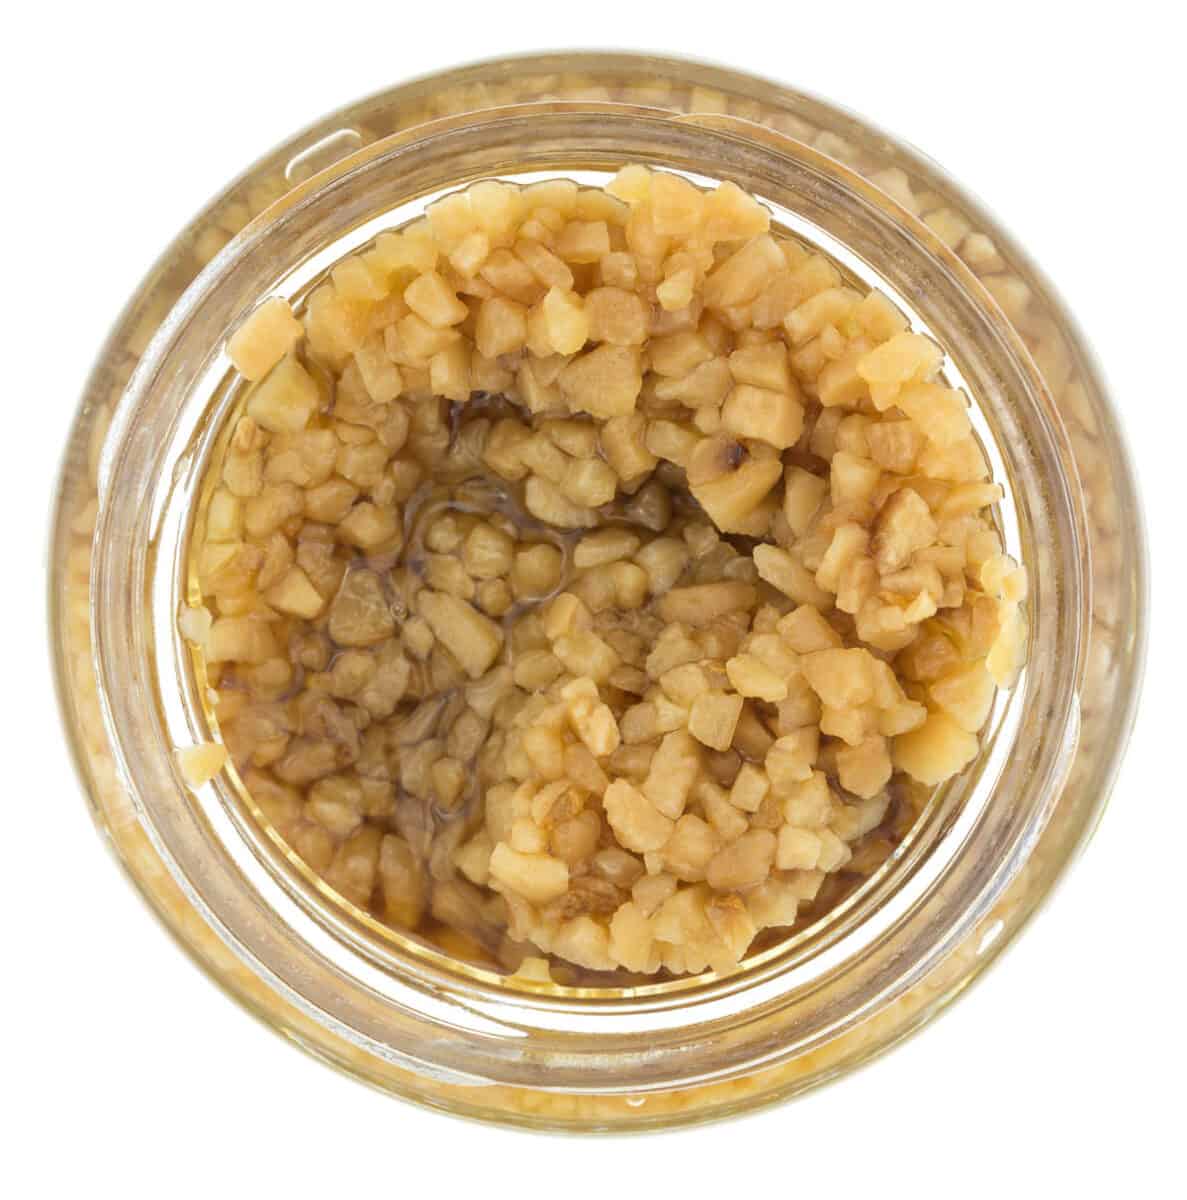 Top view of an opened jar of roasted minced garlic.